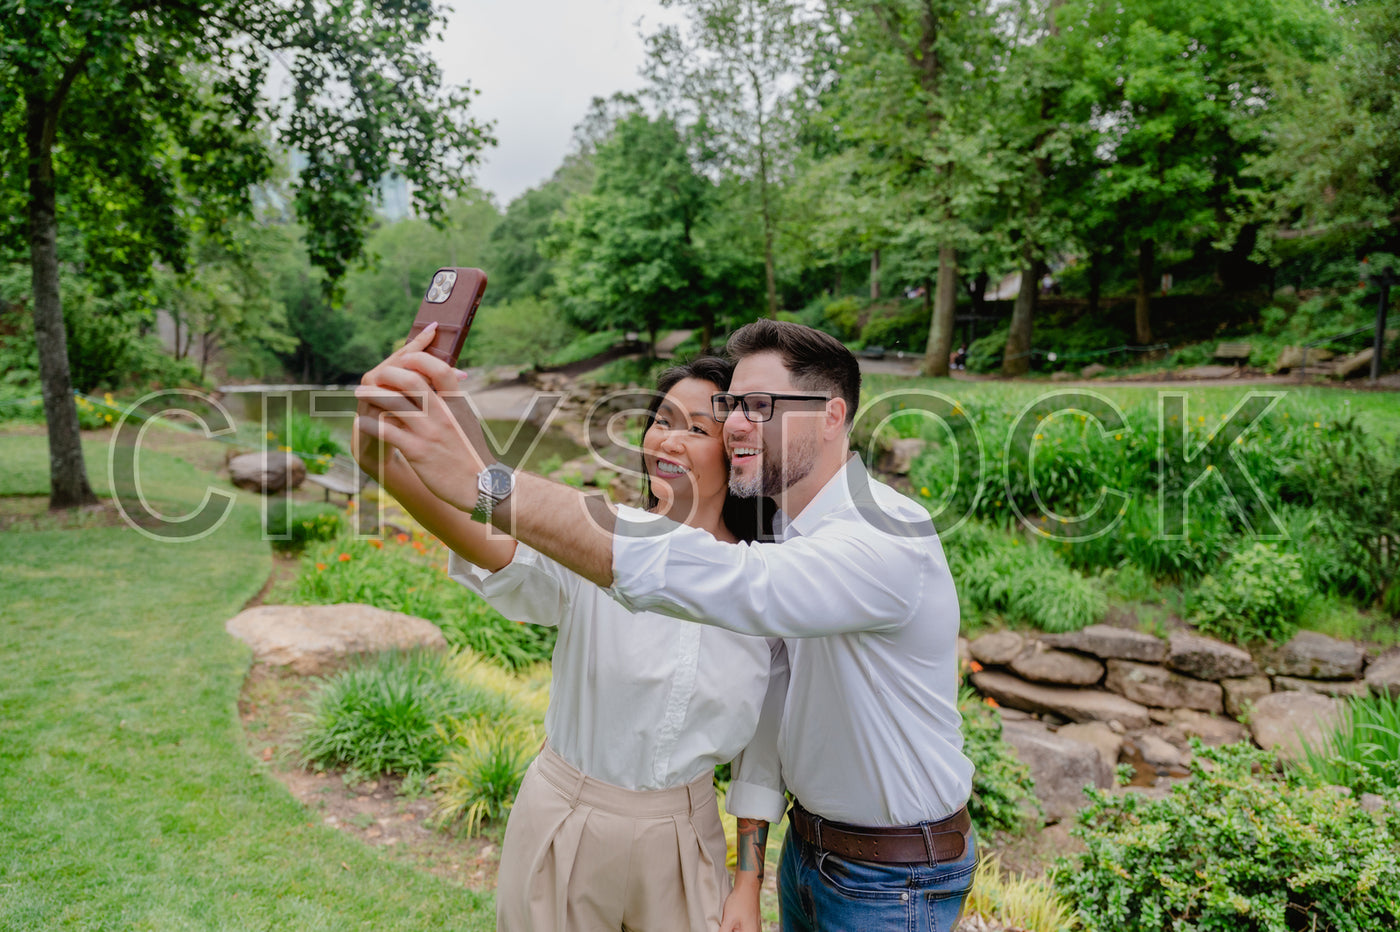 Young couple enjoying a fun selfie in scenic Greenville park, SC